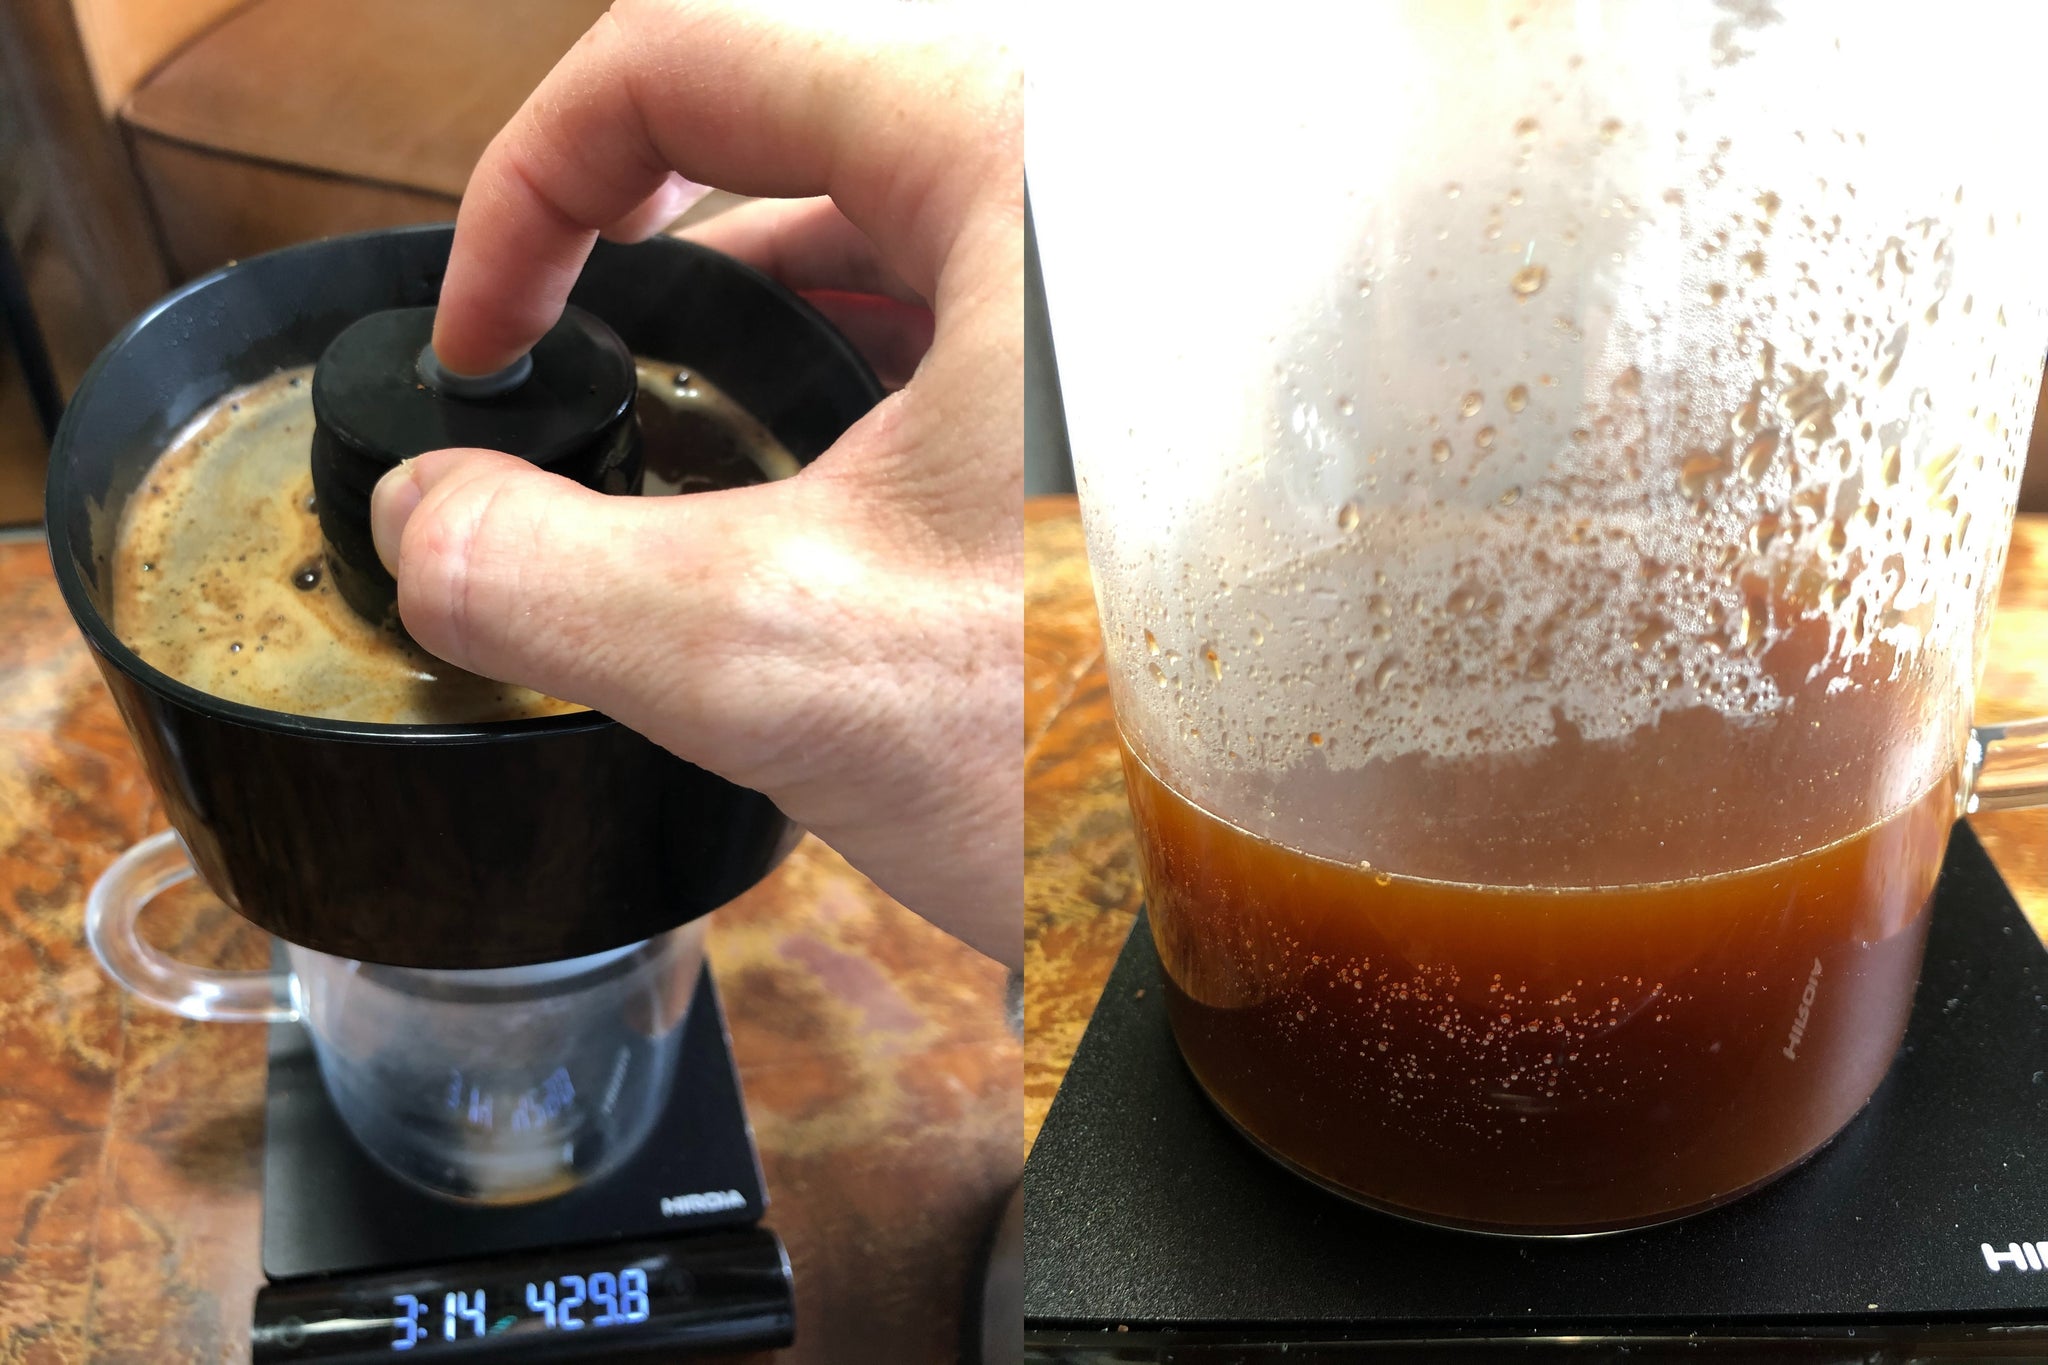 (L) Turning off the VacOne; (R) Close-up of brewed coffee with tiny bubbles in VacOne carafe